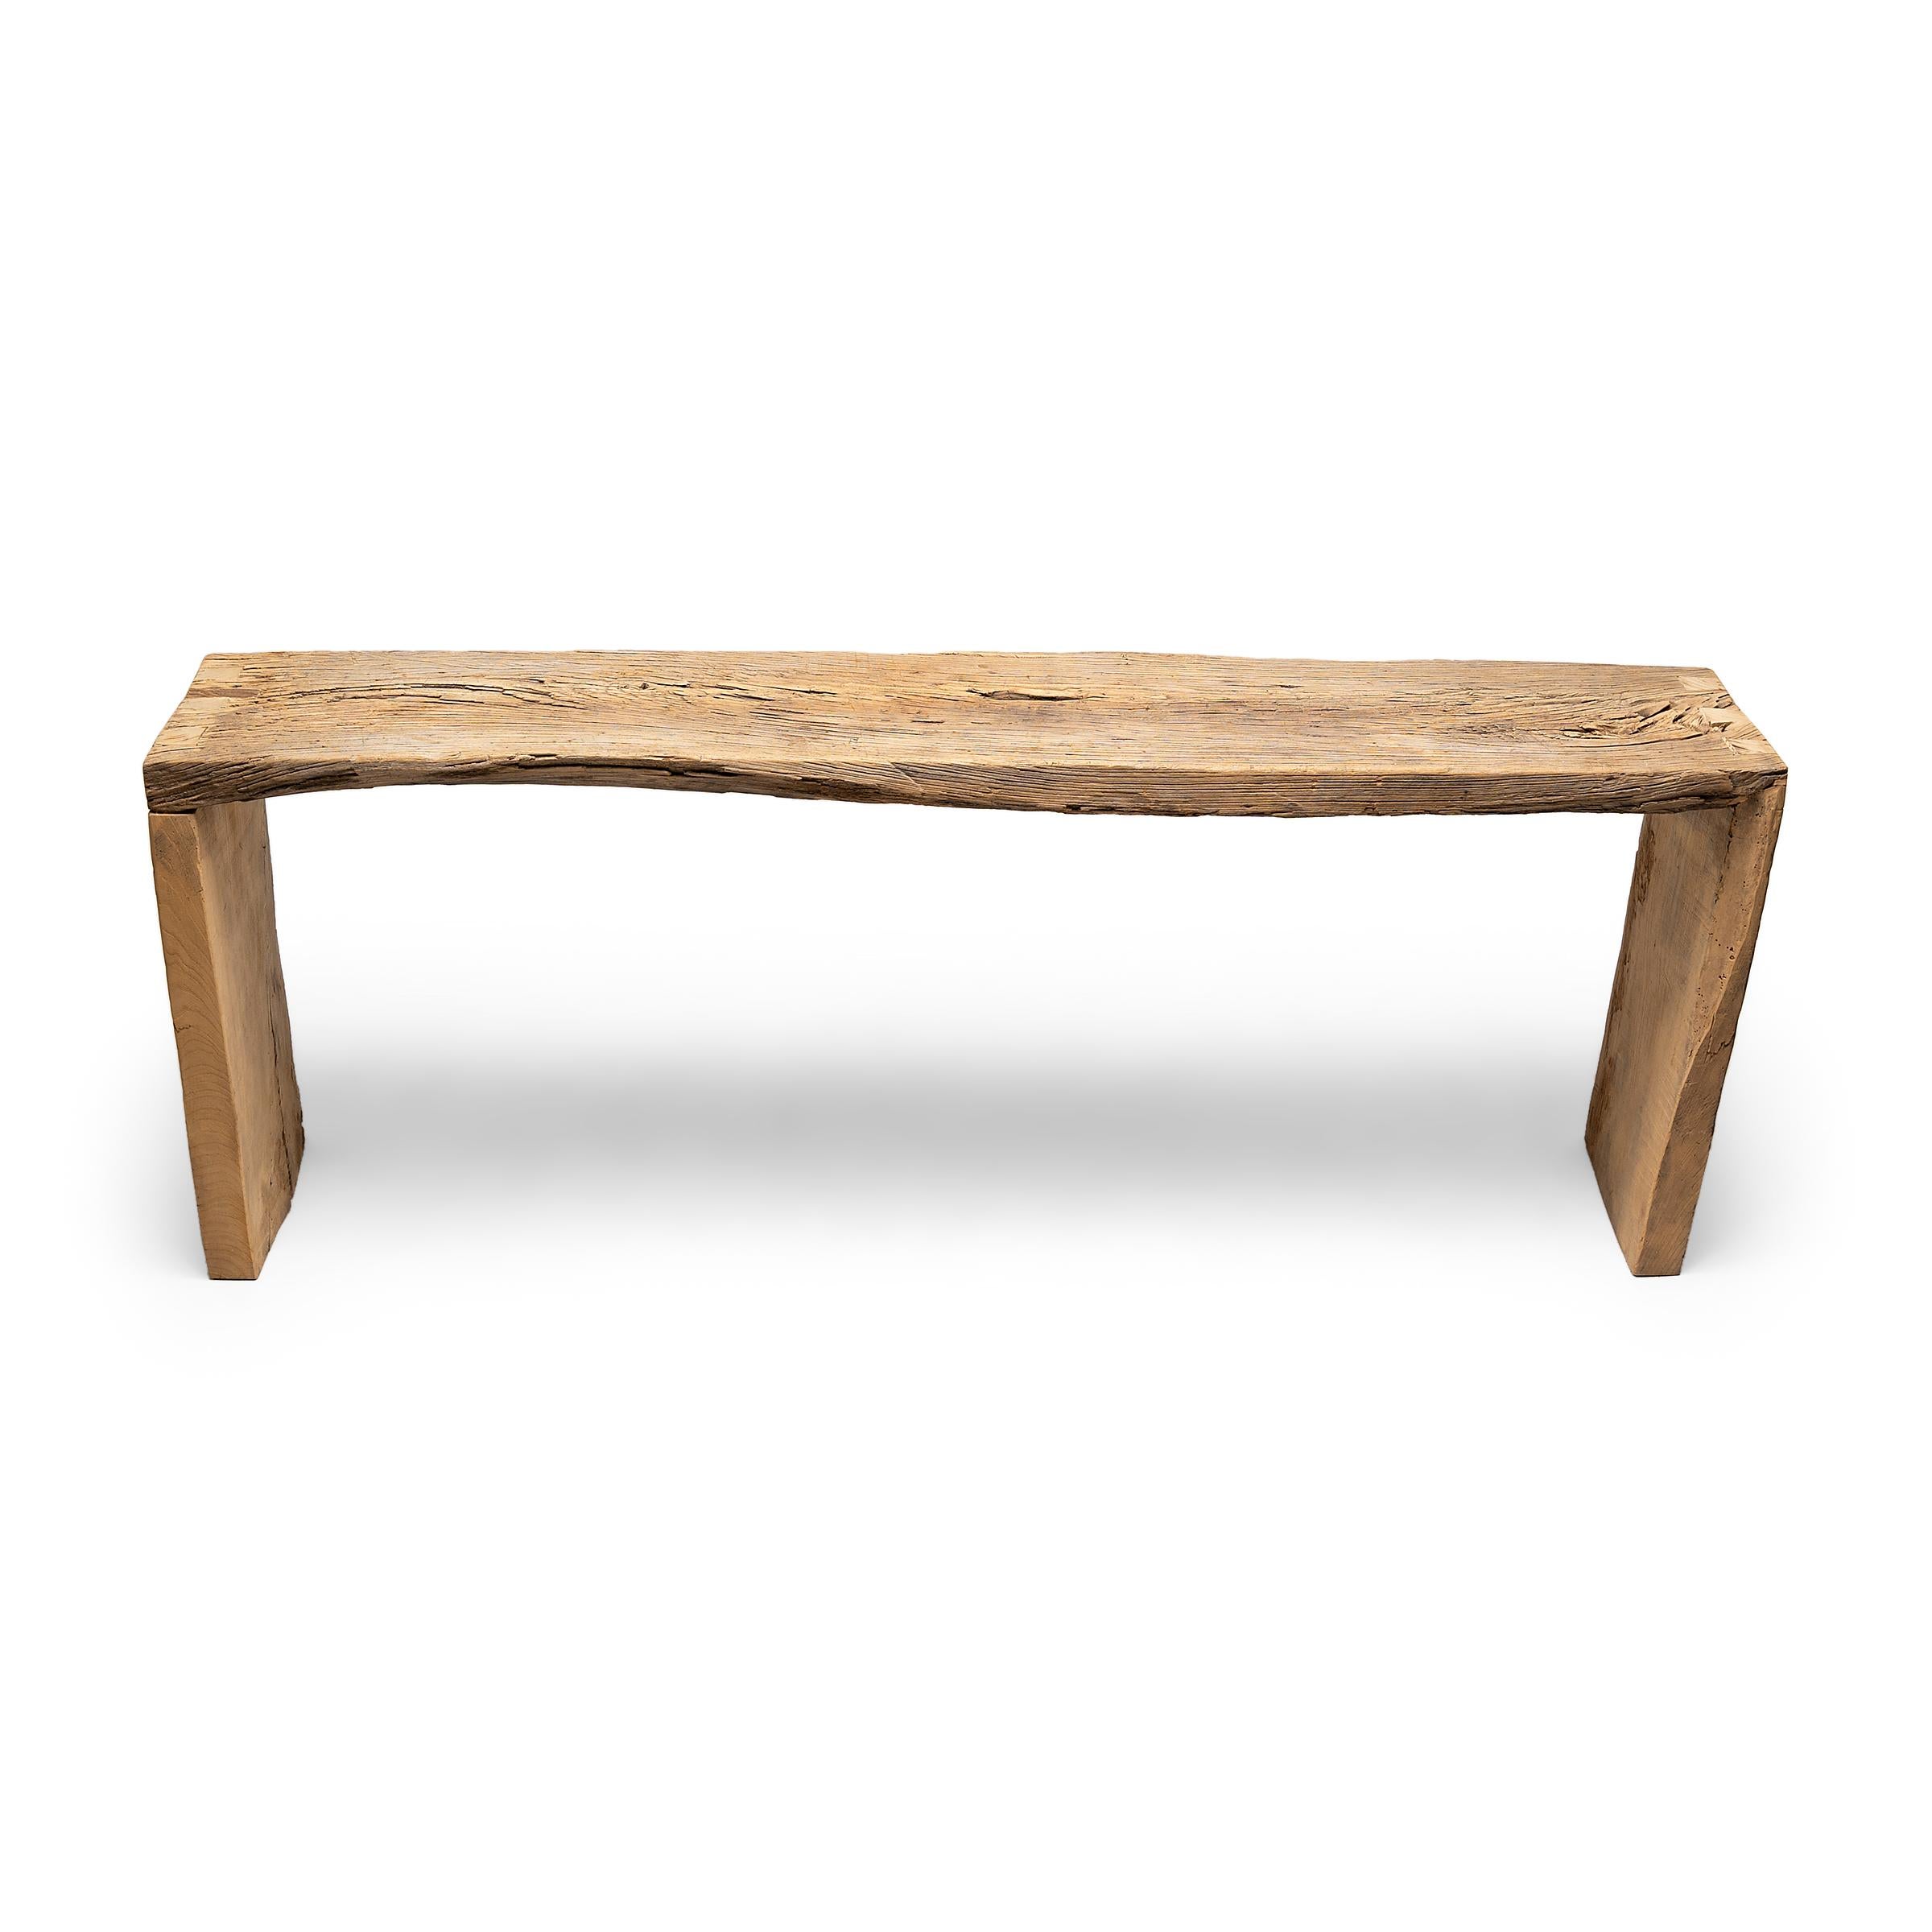 This contemporary console table is a celebration of wabi-sabi style. Crafted of wood reclaimed from Qing-dynasty architecture, the table has a minimalist waterfall design and is left unfinished to preserve the natural beauty of its materials.